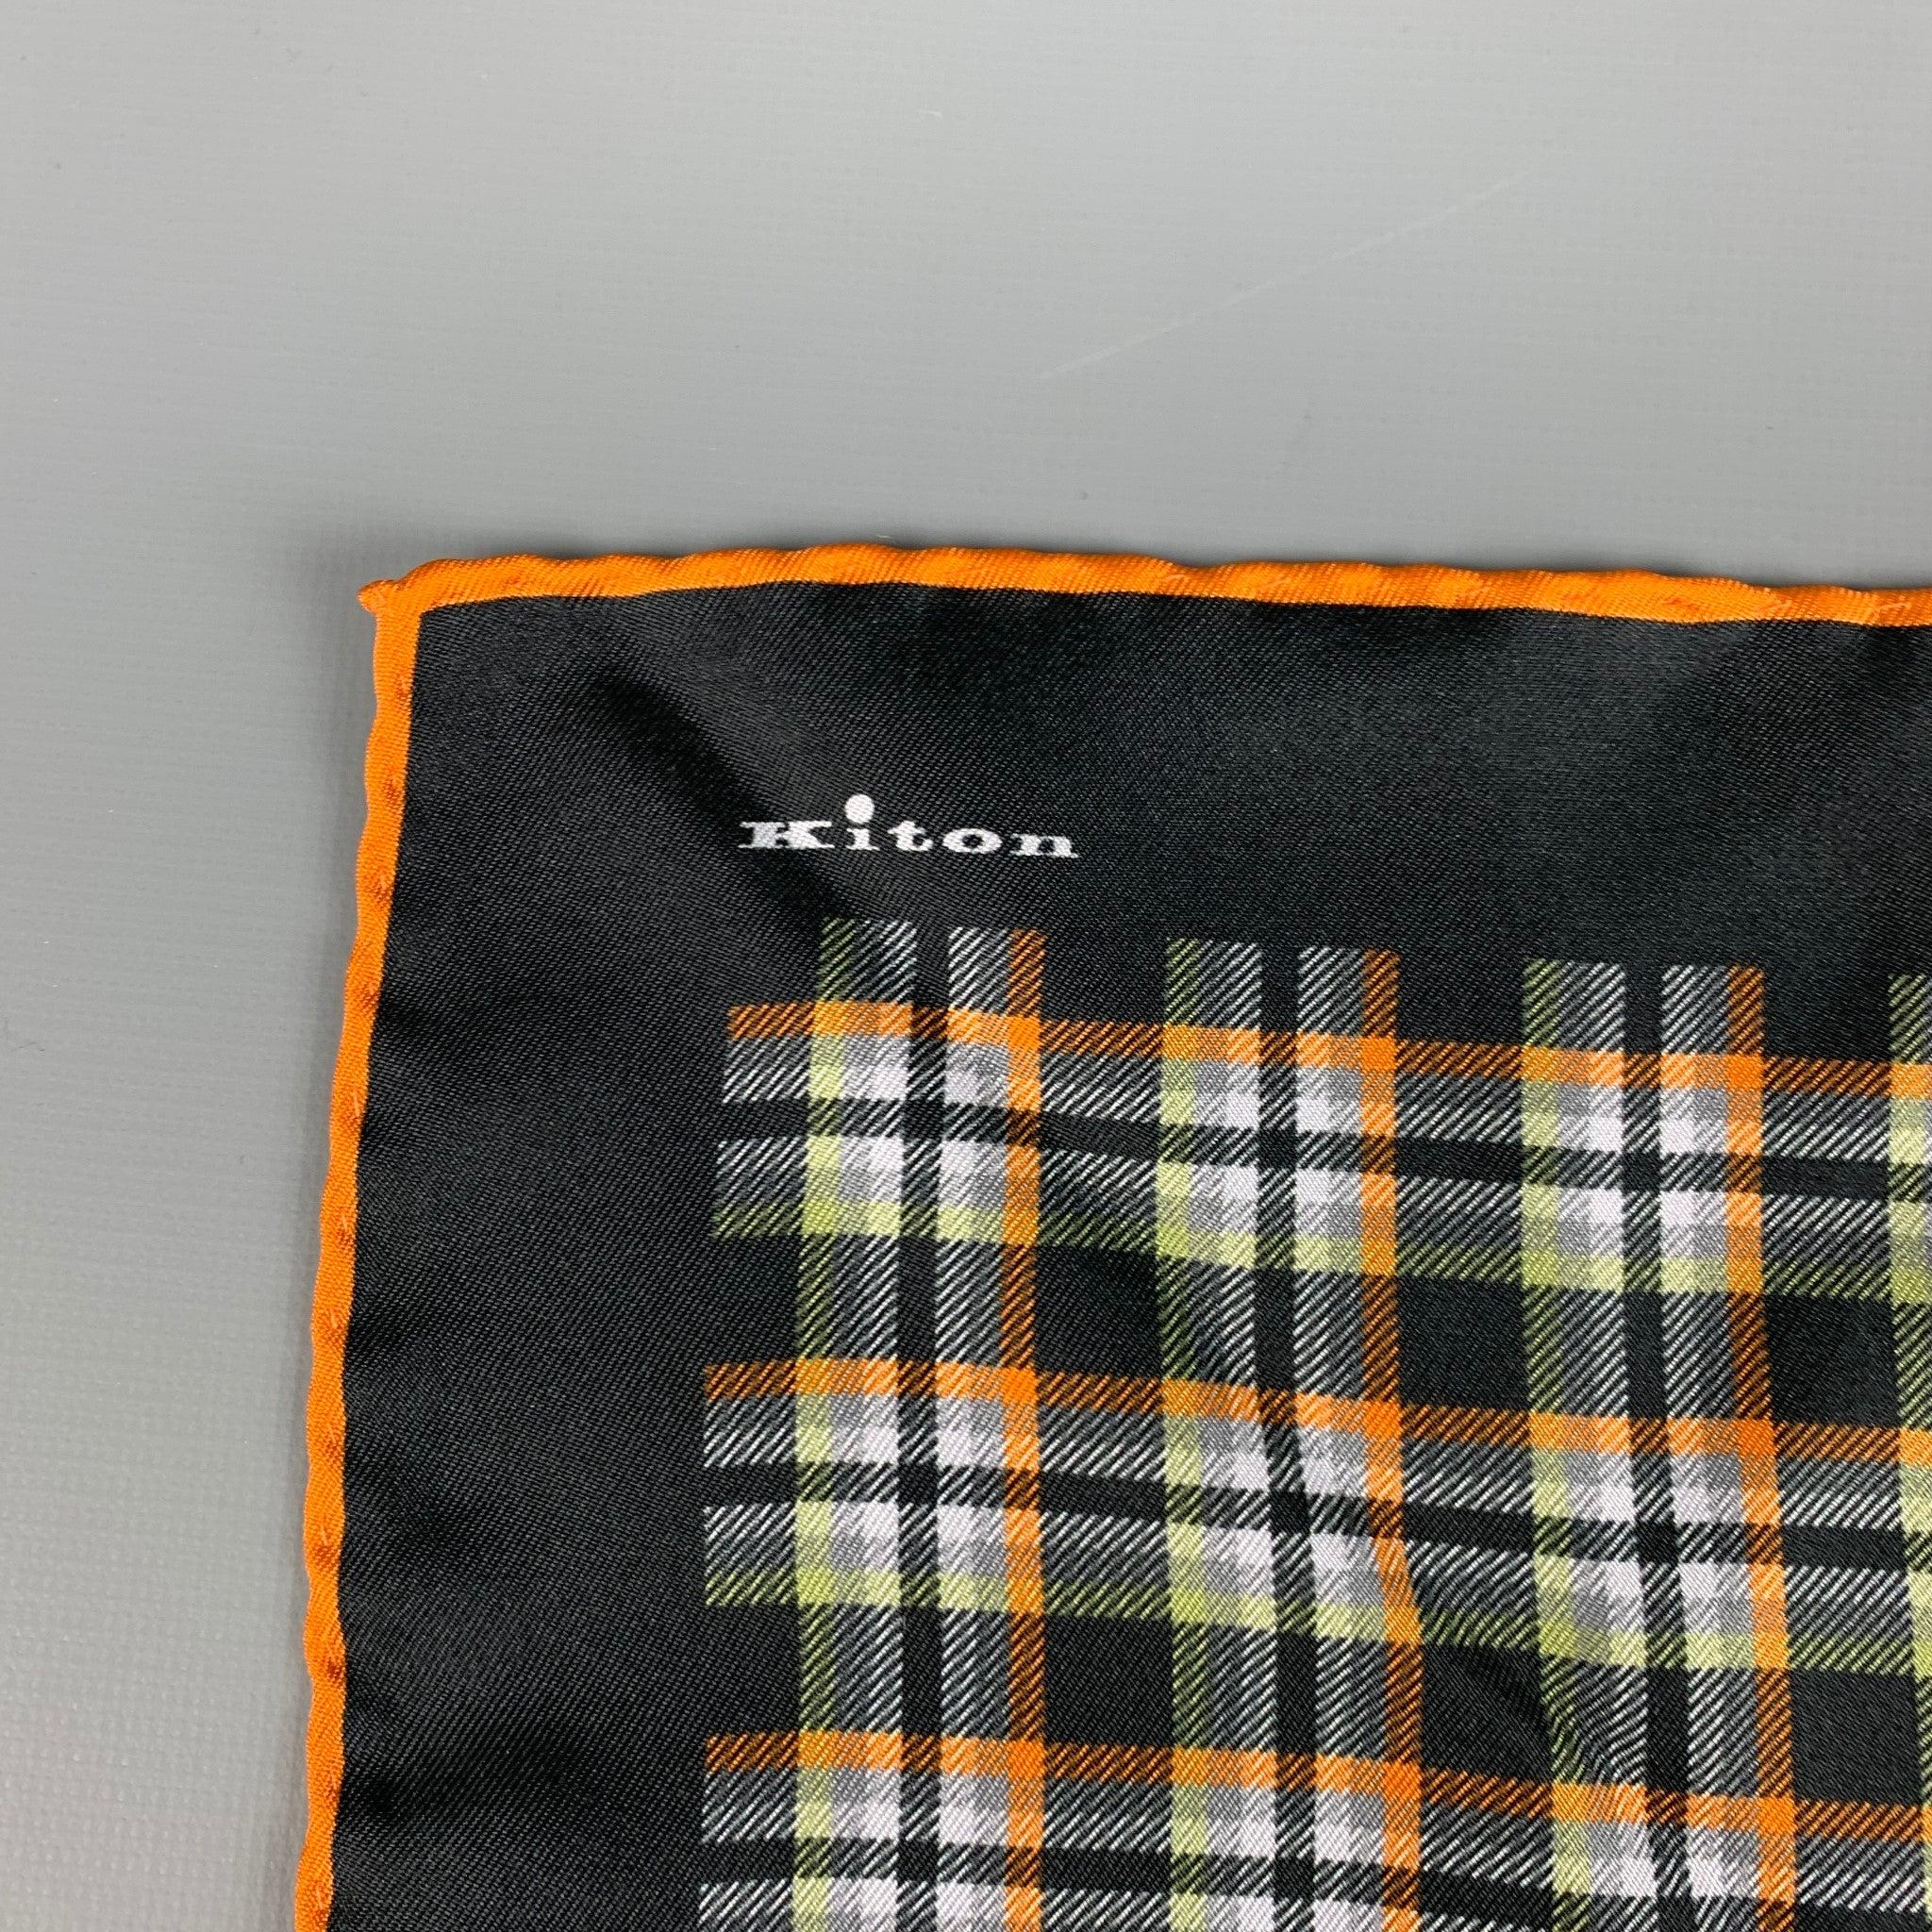 KITON
pocket square in a black silk fabric featuring orange and green plaid pattern, picture frame border, and luxurious hand rolled edge.Very Good Pre-Owned Condition. Minor signs of wear. 

Measurements: 
  16 inches  x 16 inches 

  
  
